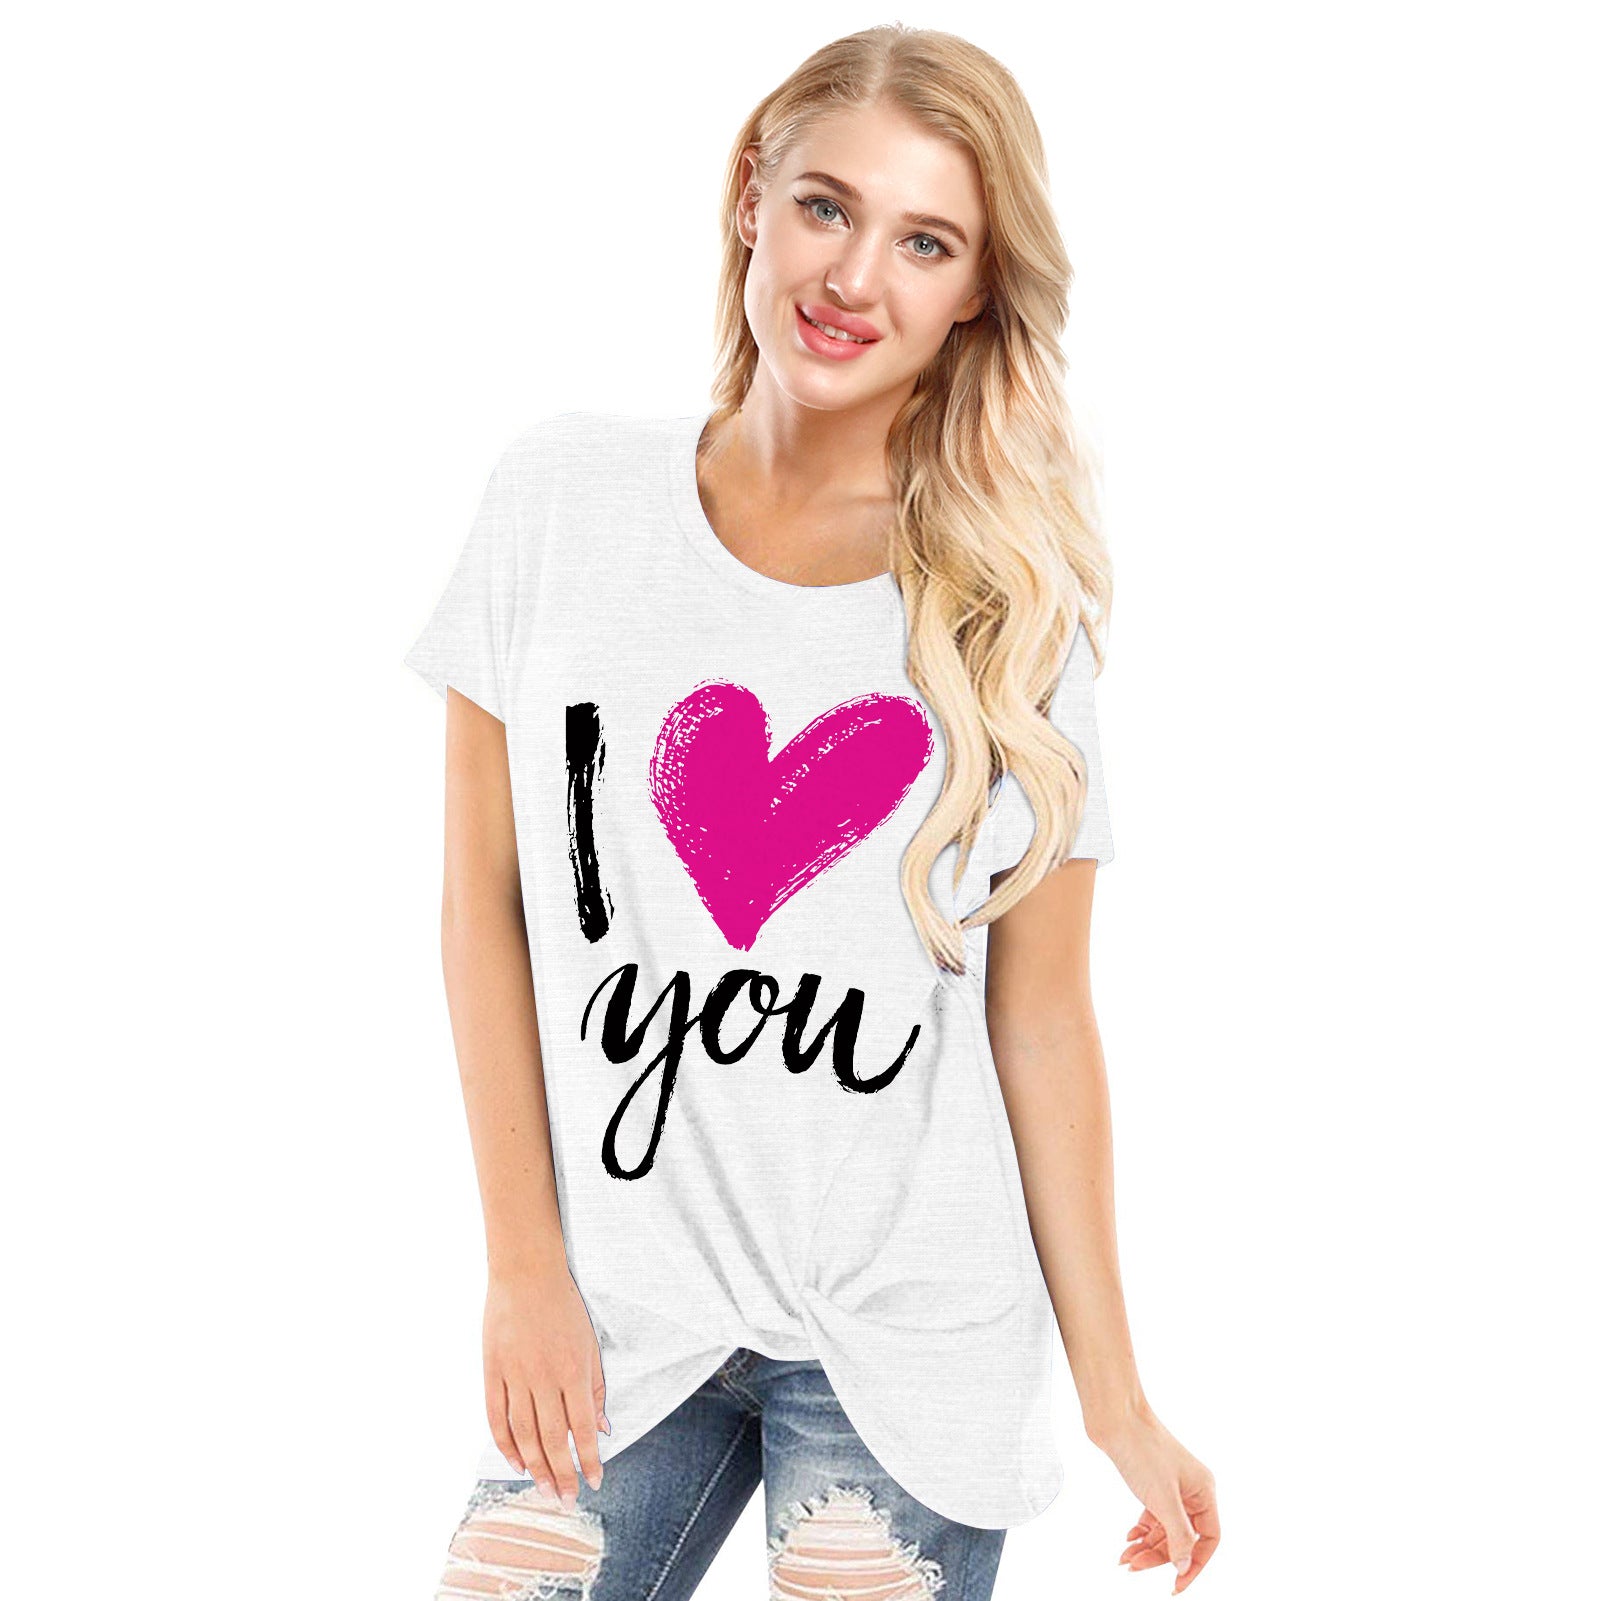 Women's Casual Loose and Comfortable " I love you "  Kink T-shirt - mihoodie